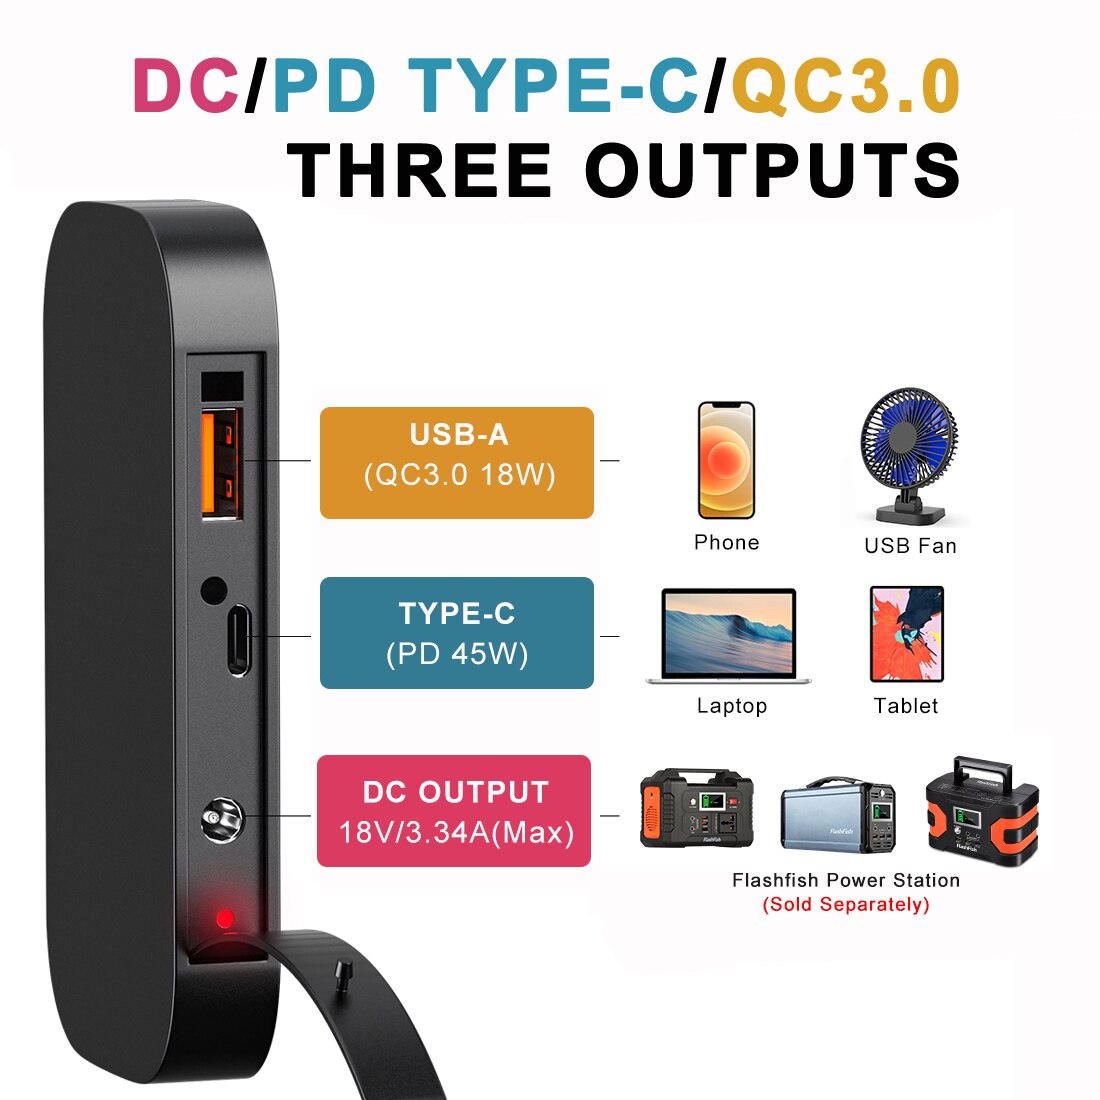 DCIPD TYPE-C/Qc3.0 T